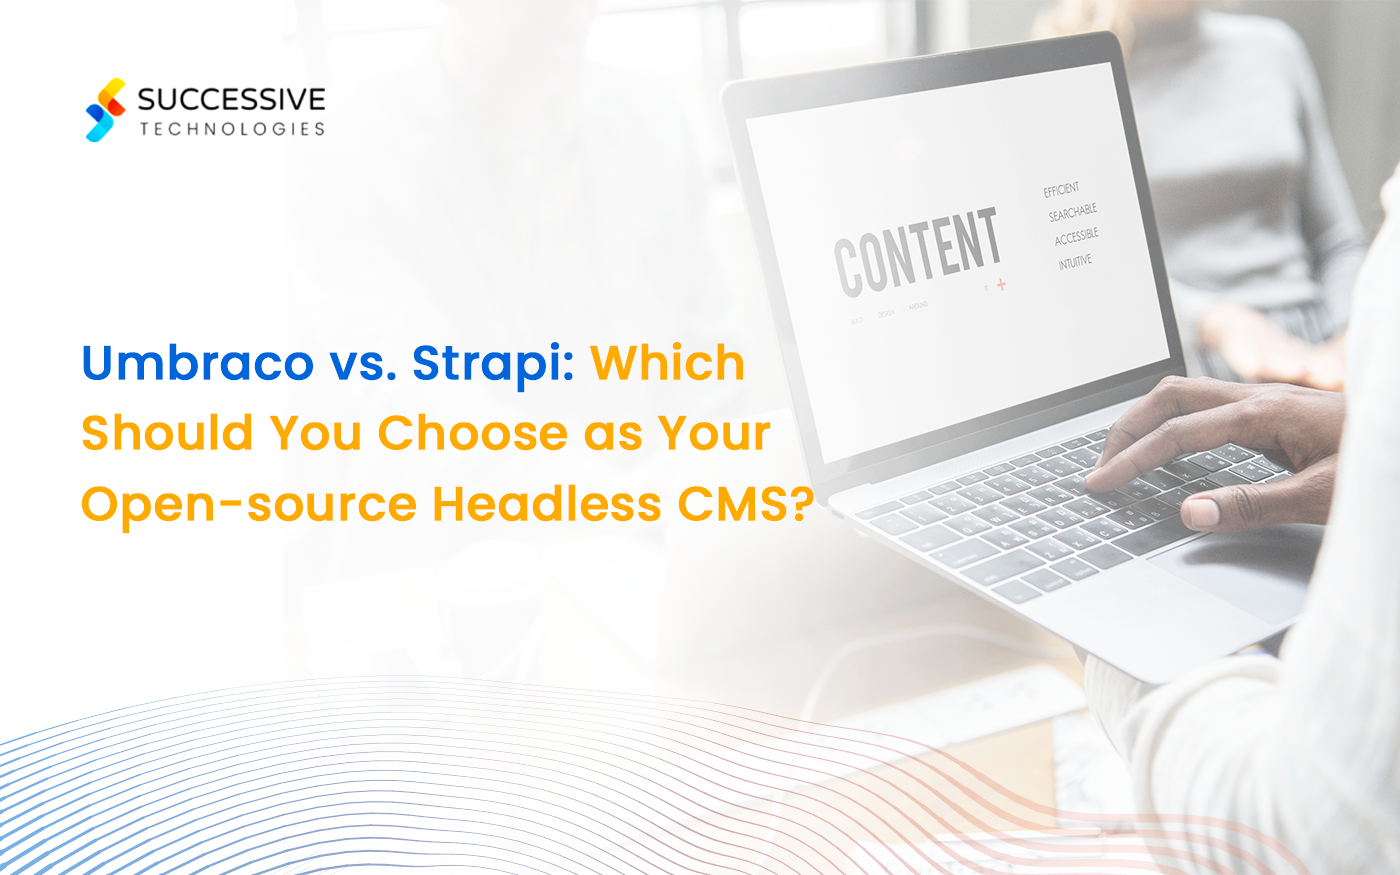 Umbraco vs. Strapi: Which Should You Choose as Your Open-source Headless CMS?